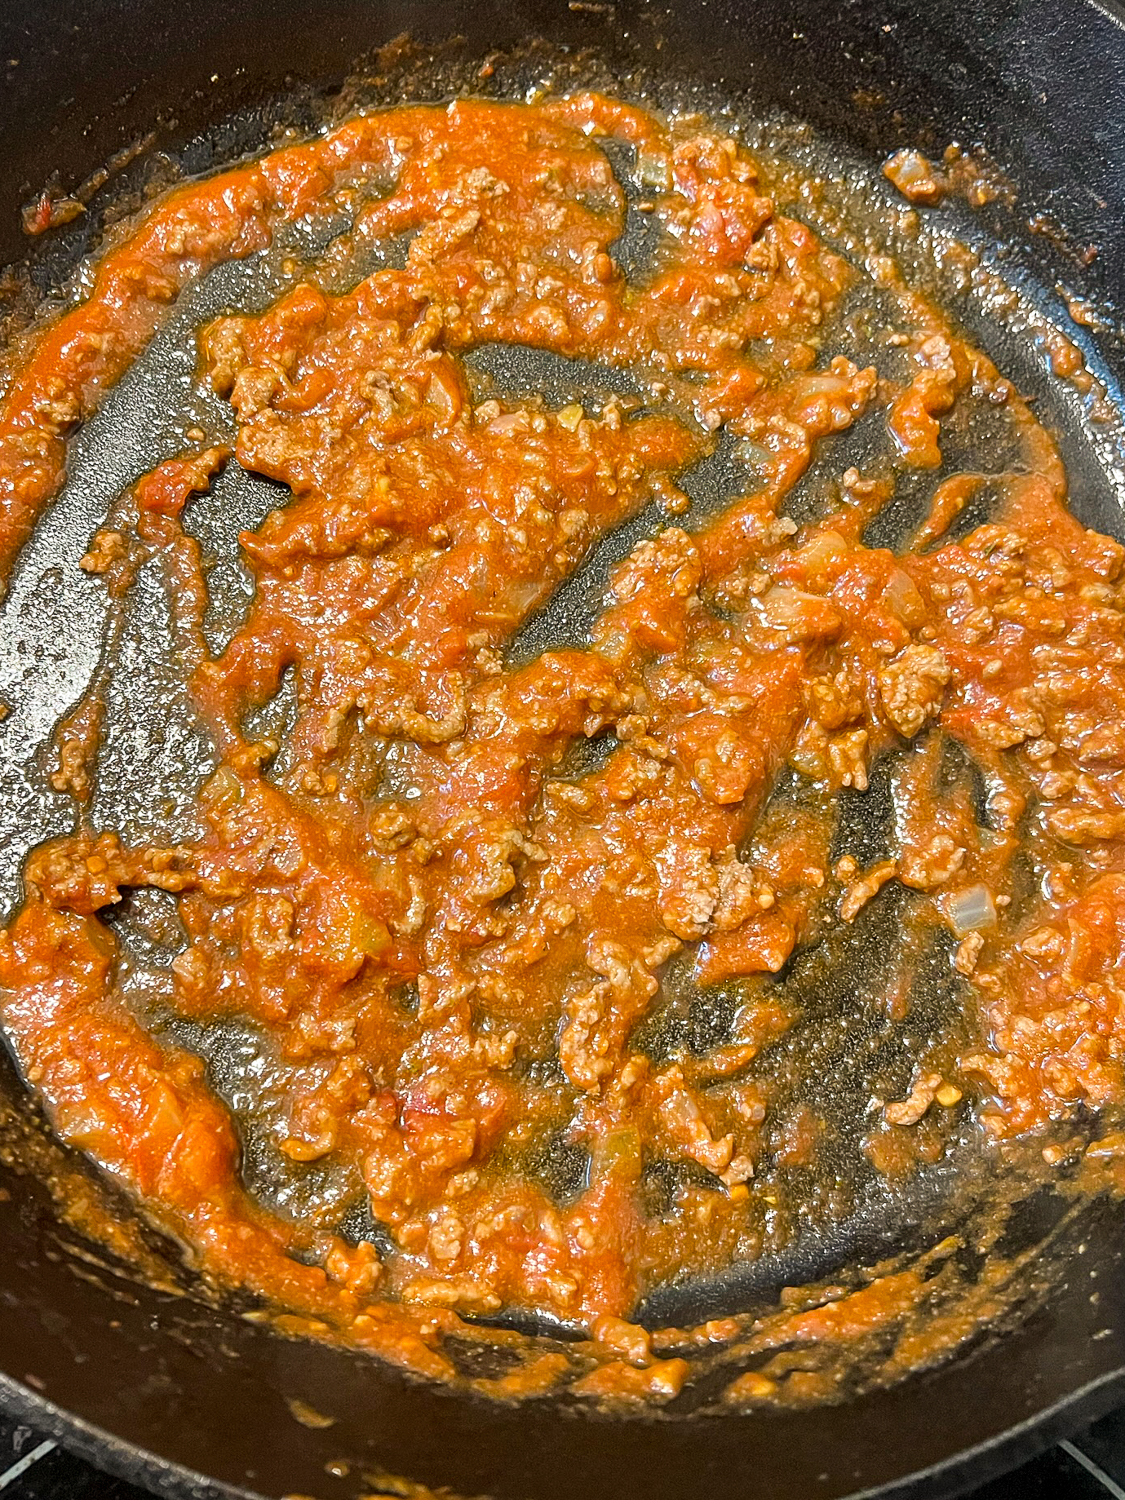 A small amount of meat sauce added to the bottom of the skillet.